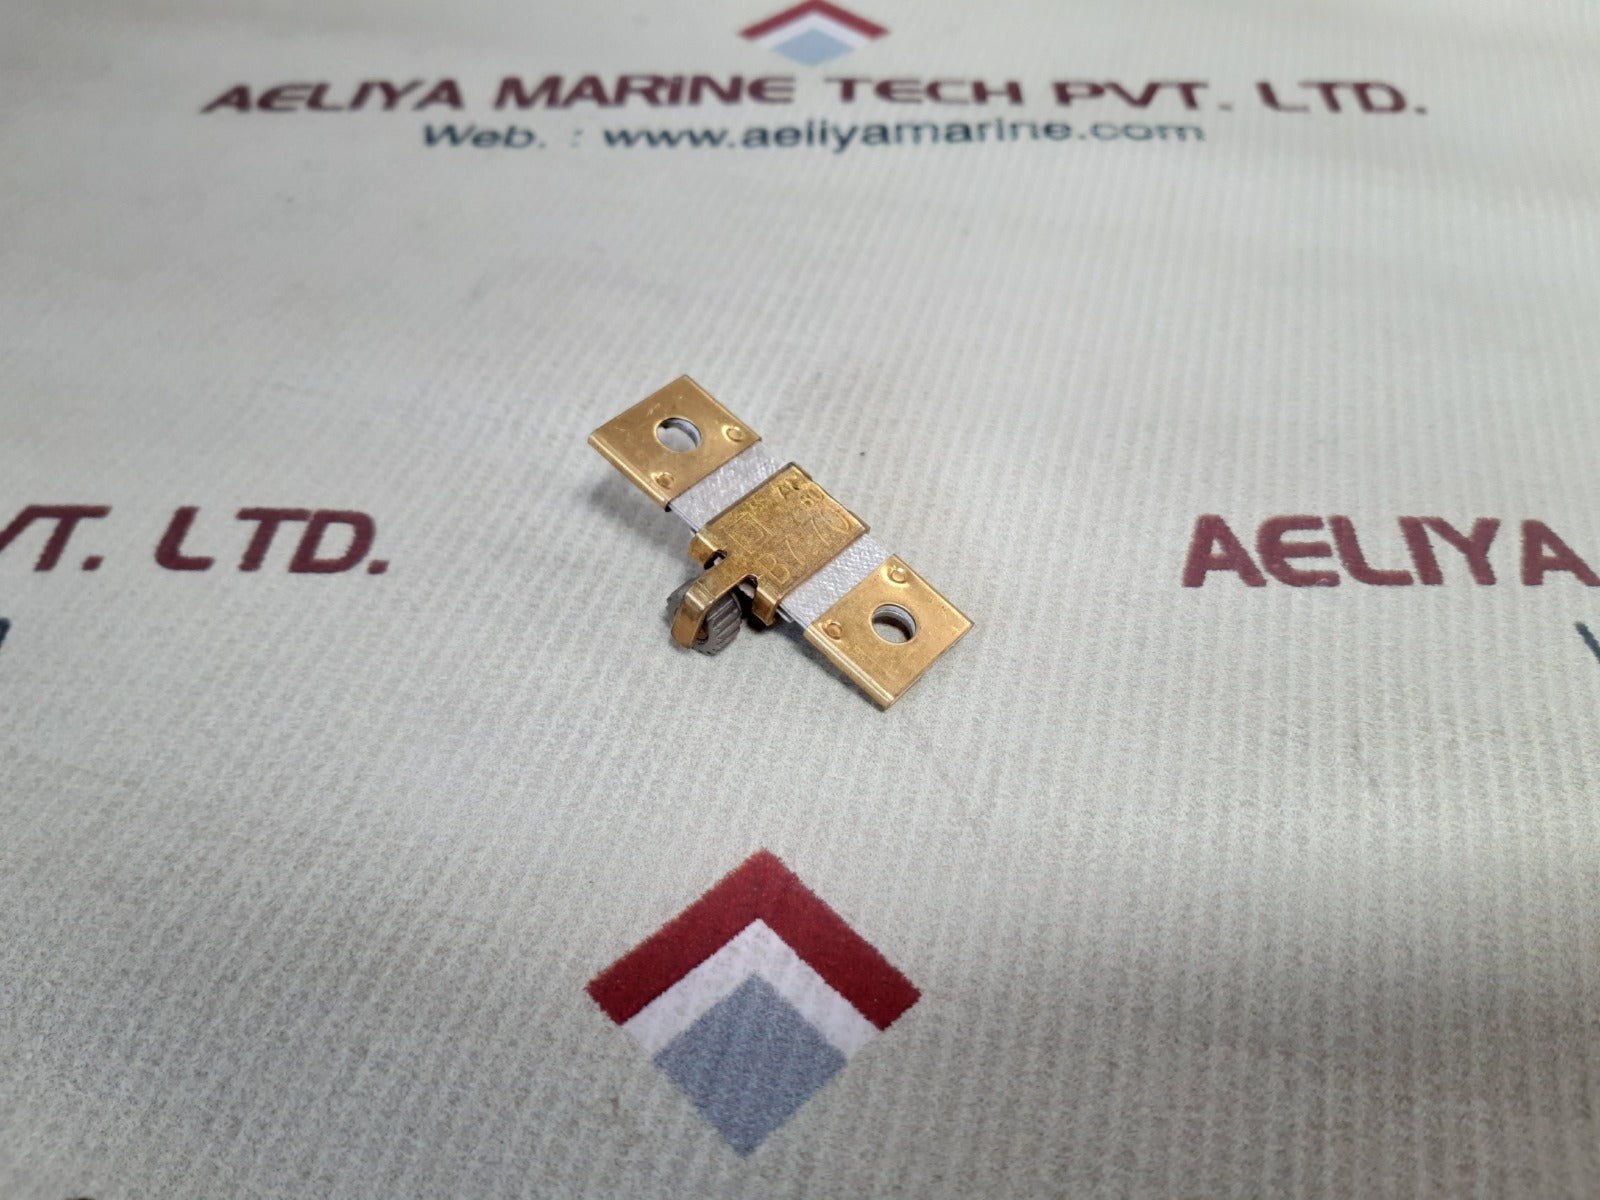 square D ah 80 b7.70 overload relay thermal unit